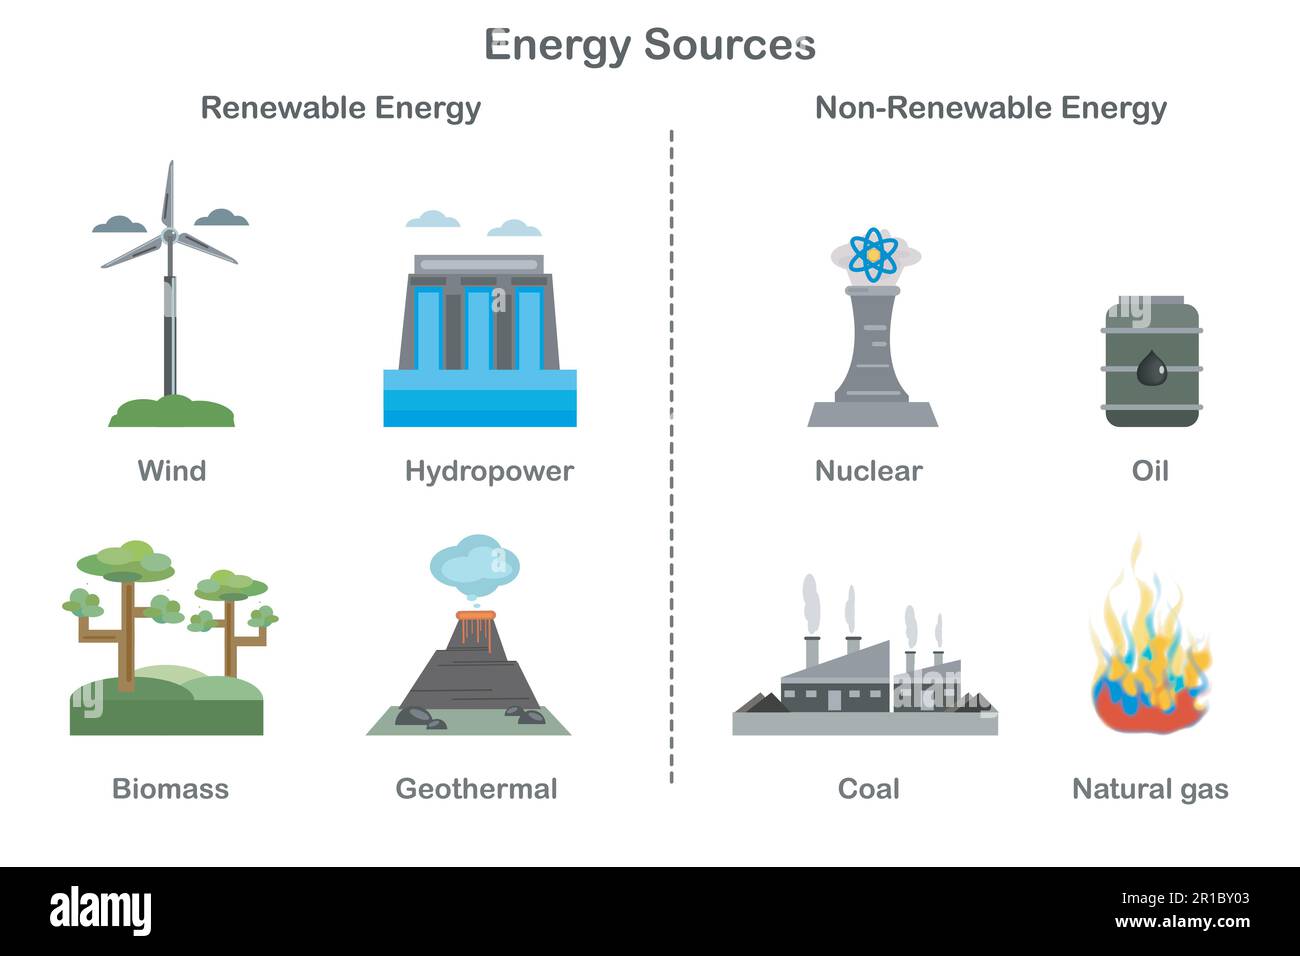 Steam energy sources фото 13